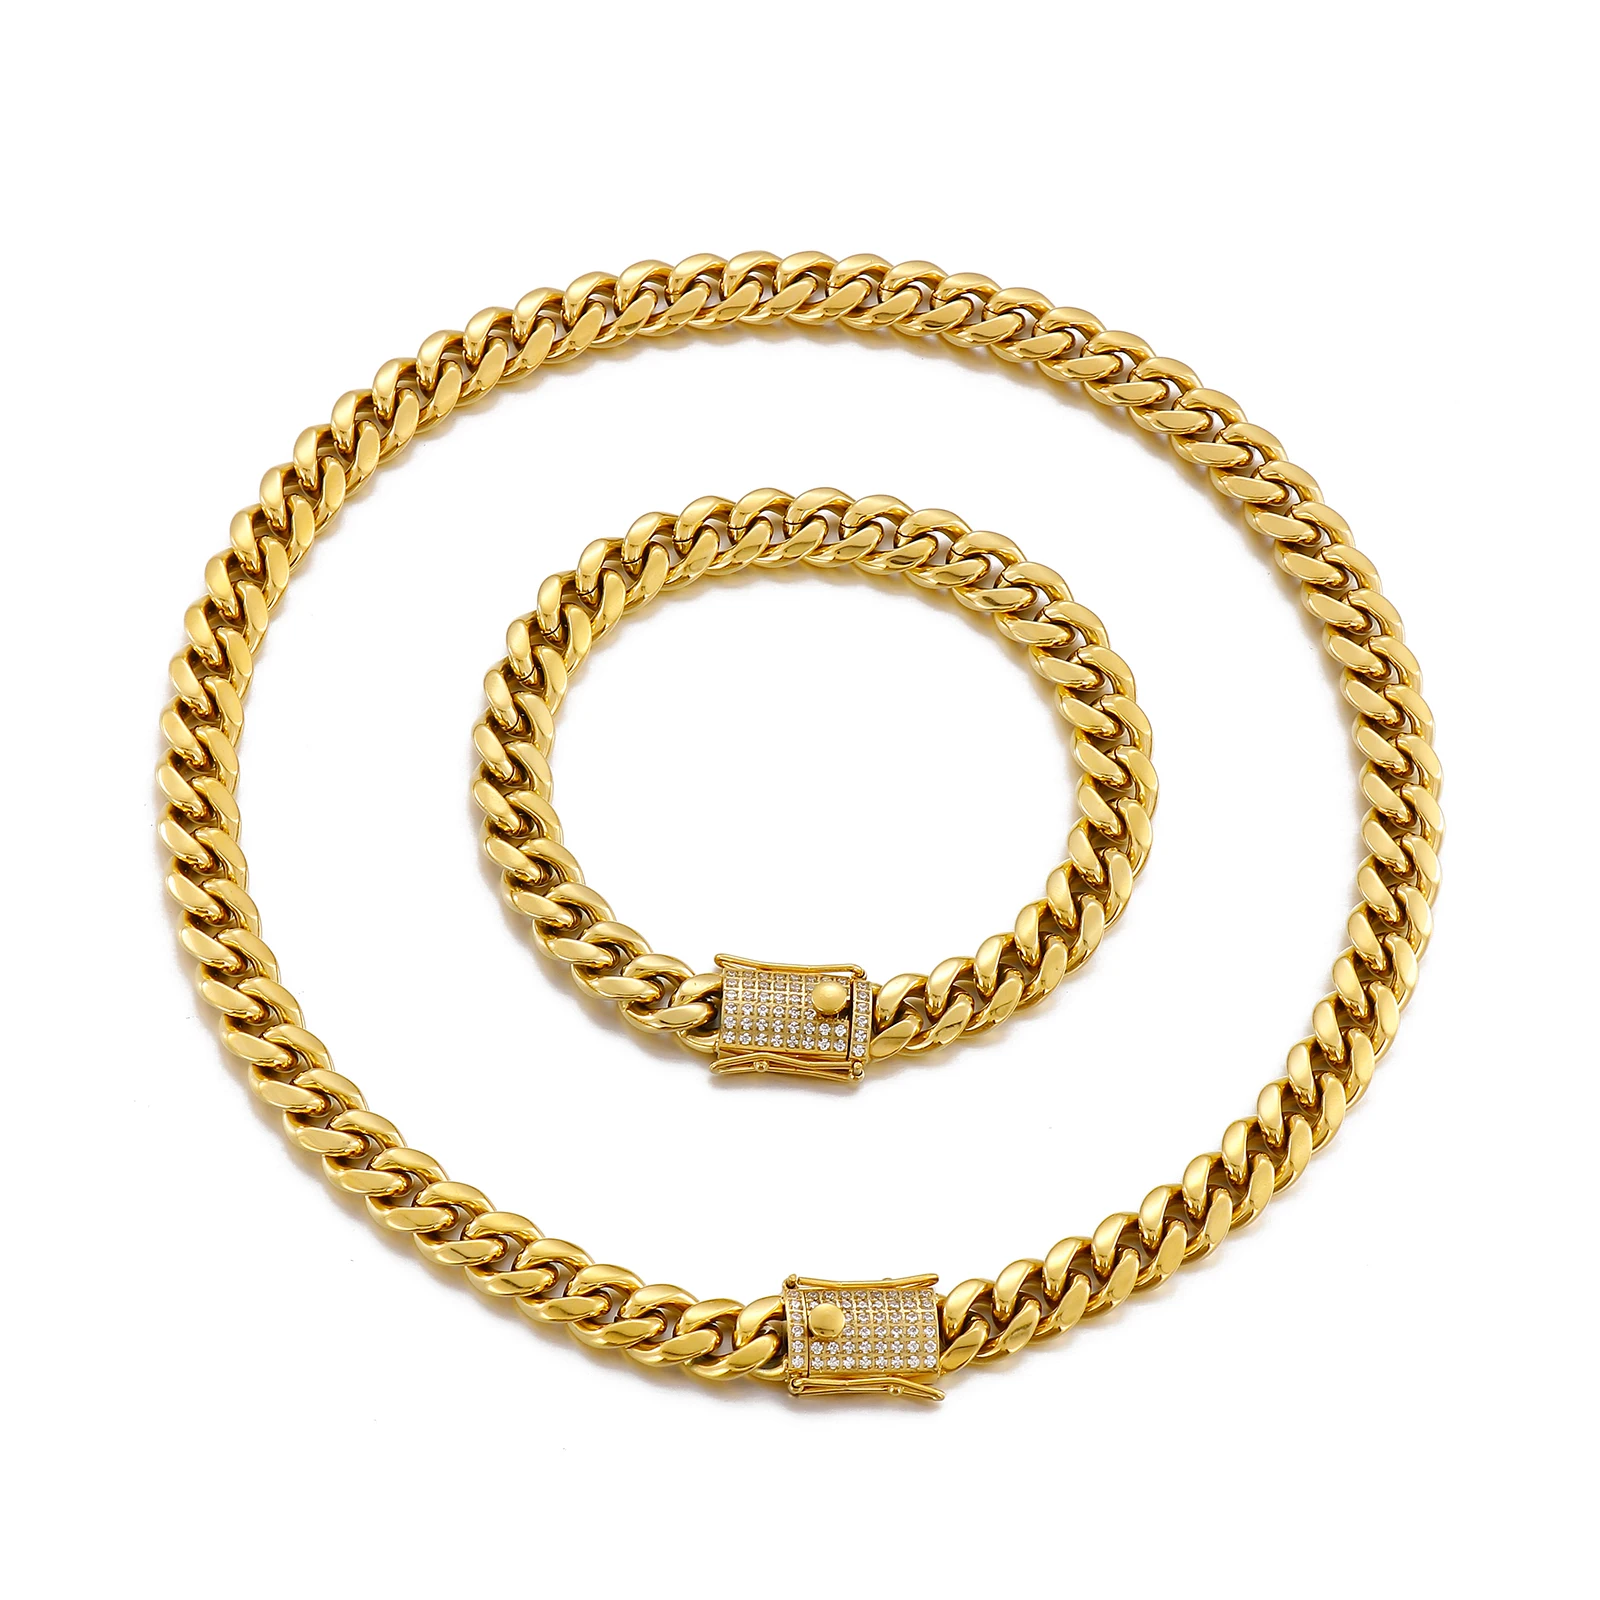 10mm Stainless Steel Miami Curb Cuban Chain Necklace Boys Men Gold Color Hip hop Dragon Lock Clasp Link Jewelry 18 K Bracelet